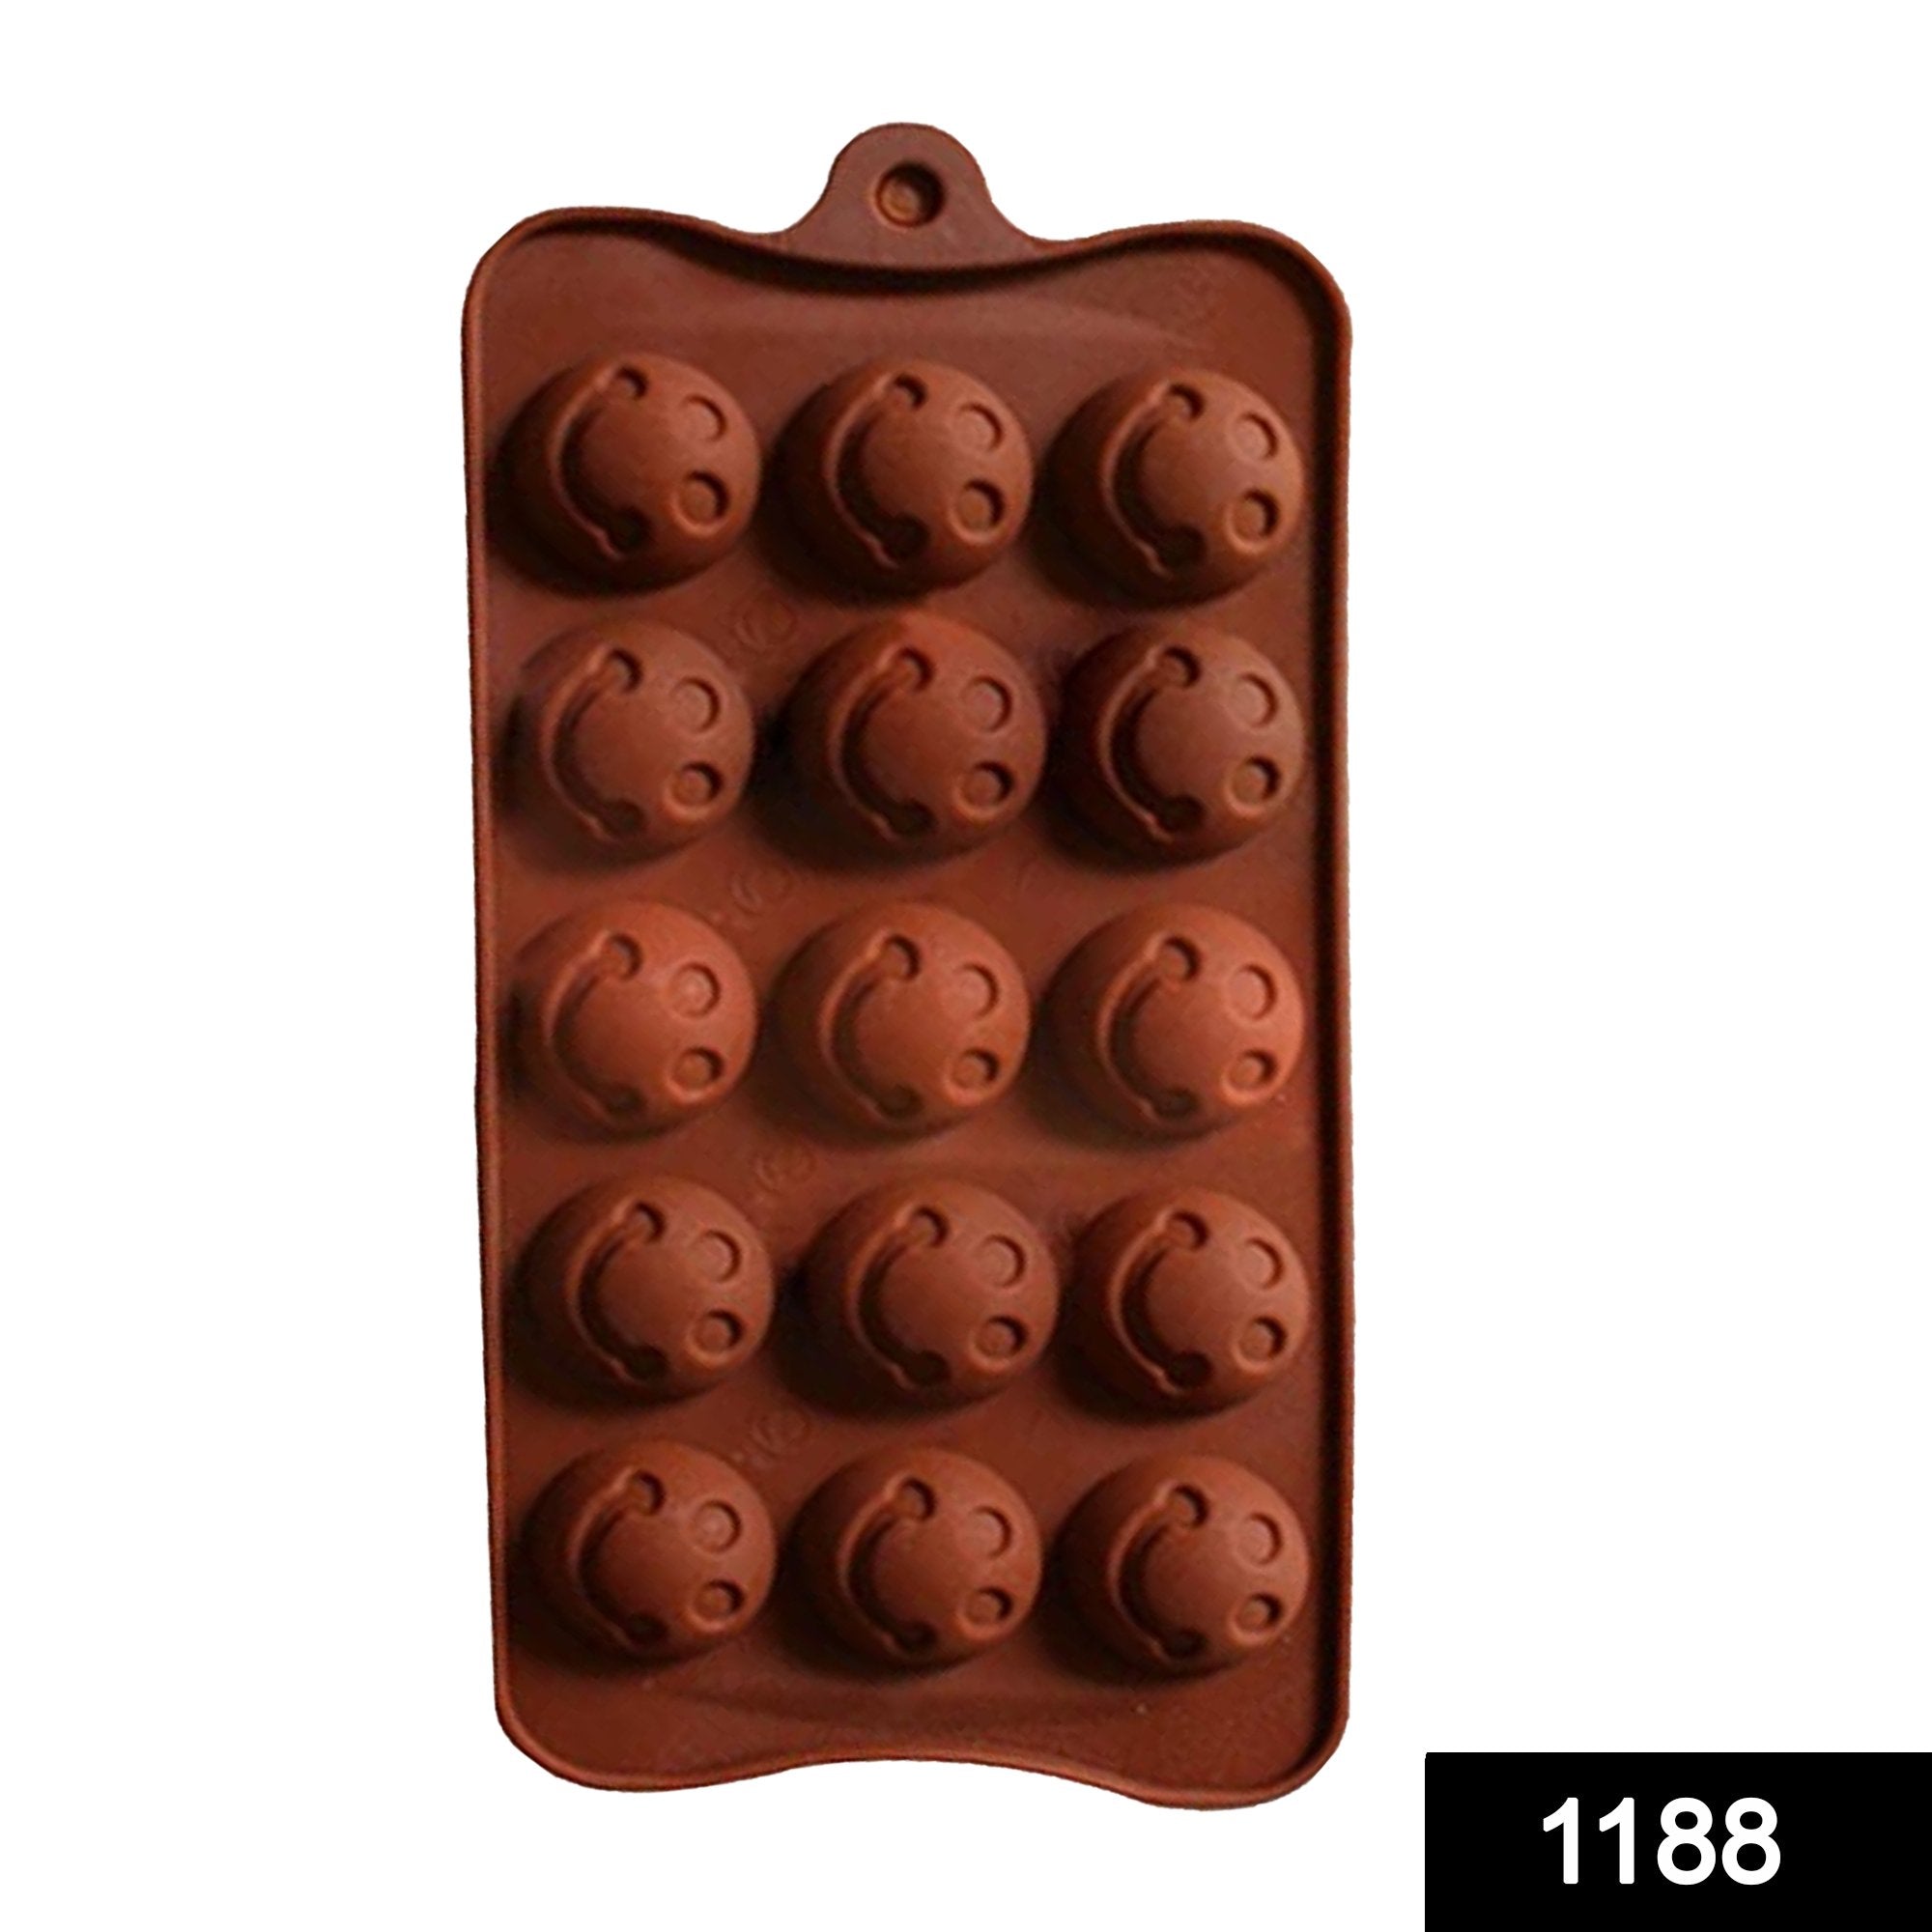 1188 Food Grade Non-Stick Reusable Silicone Smile Shape 15 Cavity Chocolate Molds / Baking Trays - SkyShopy